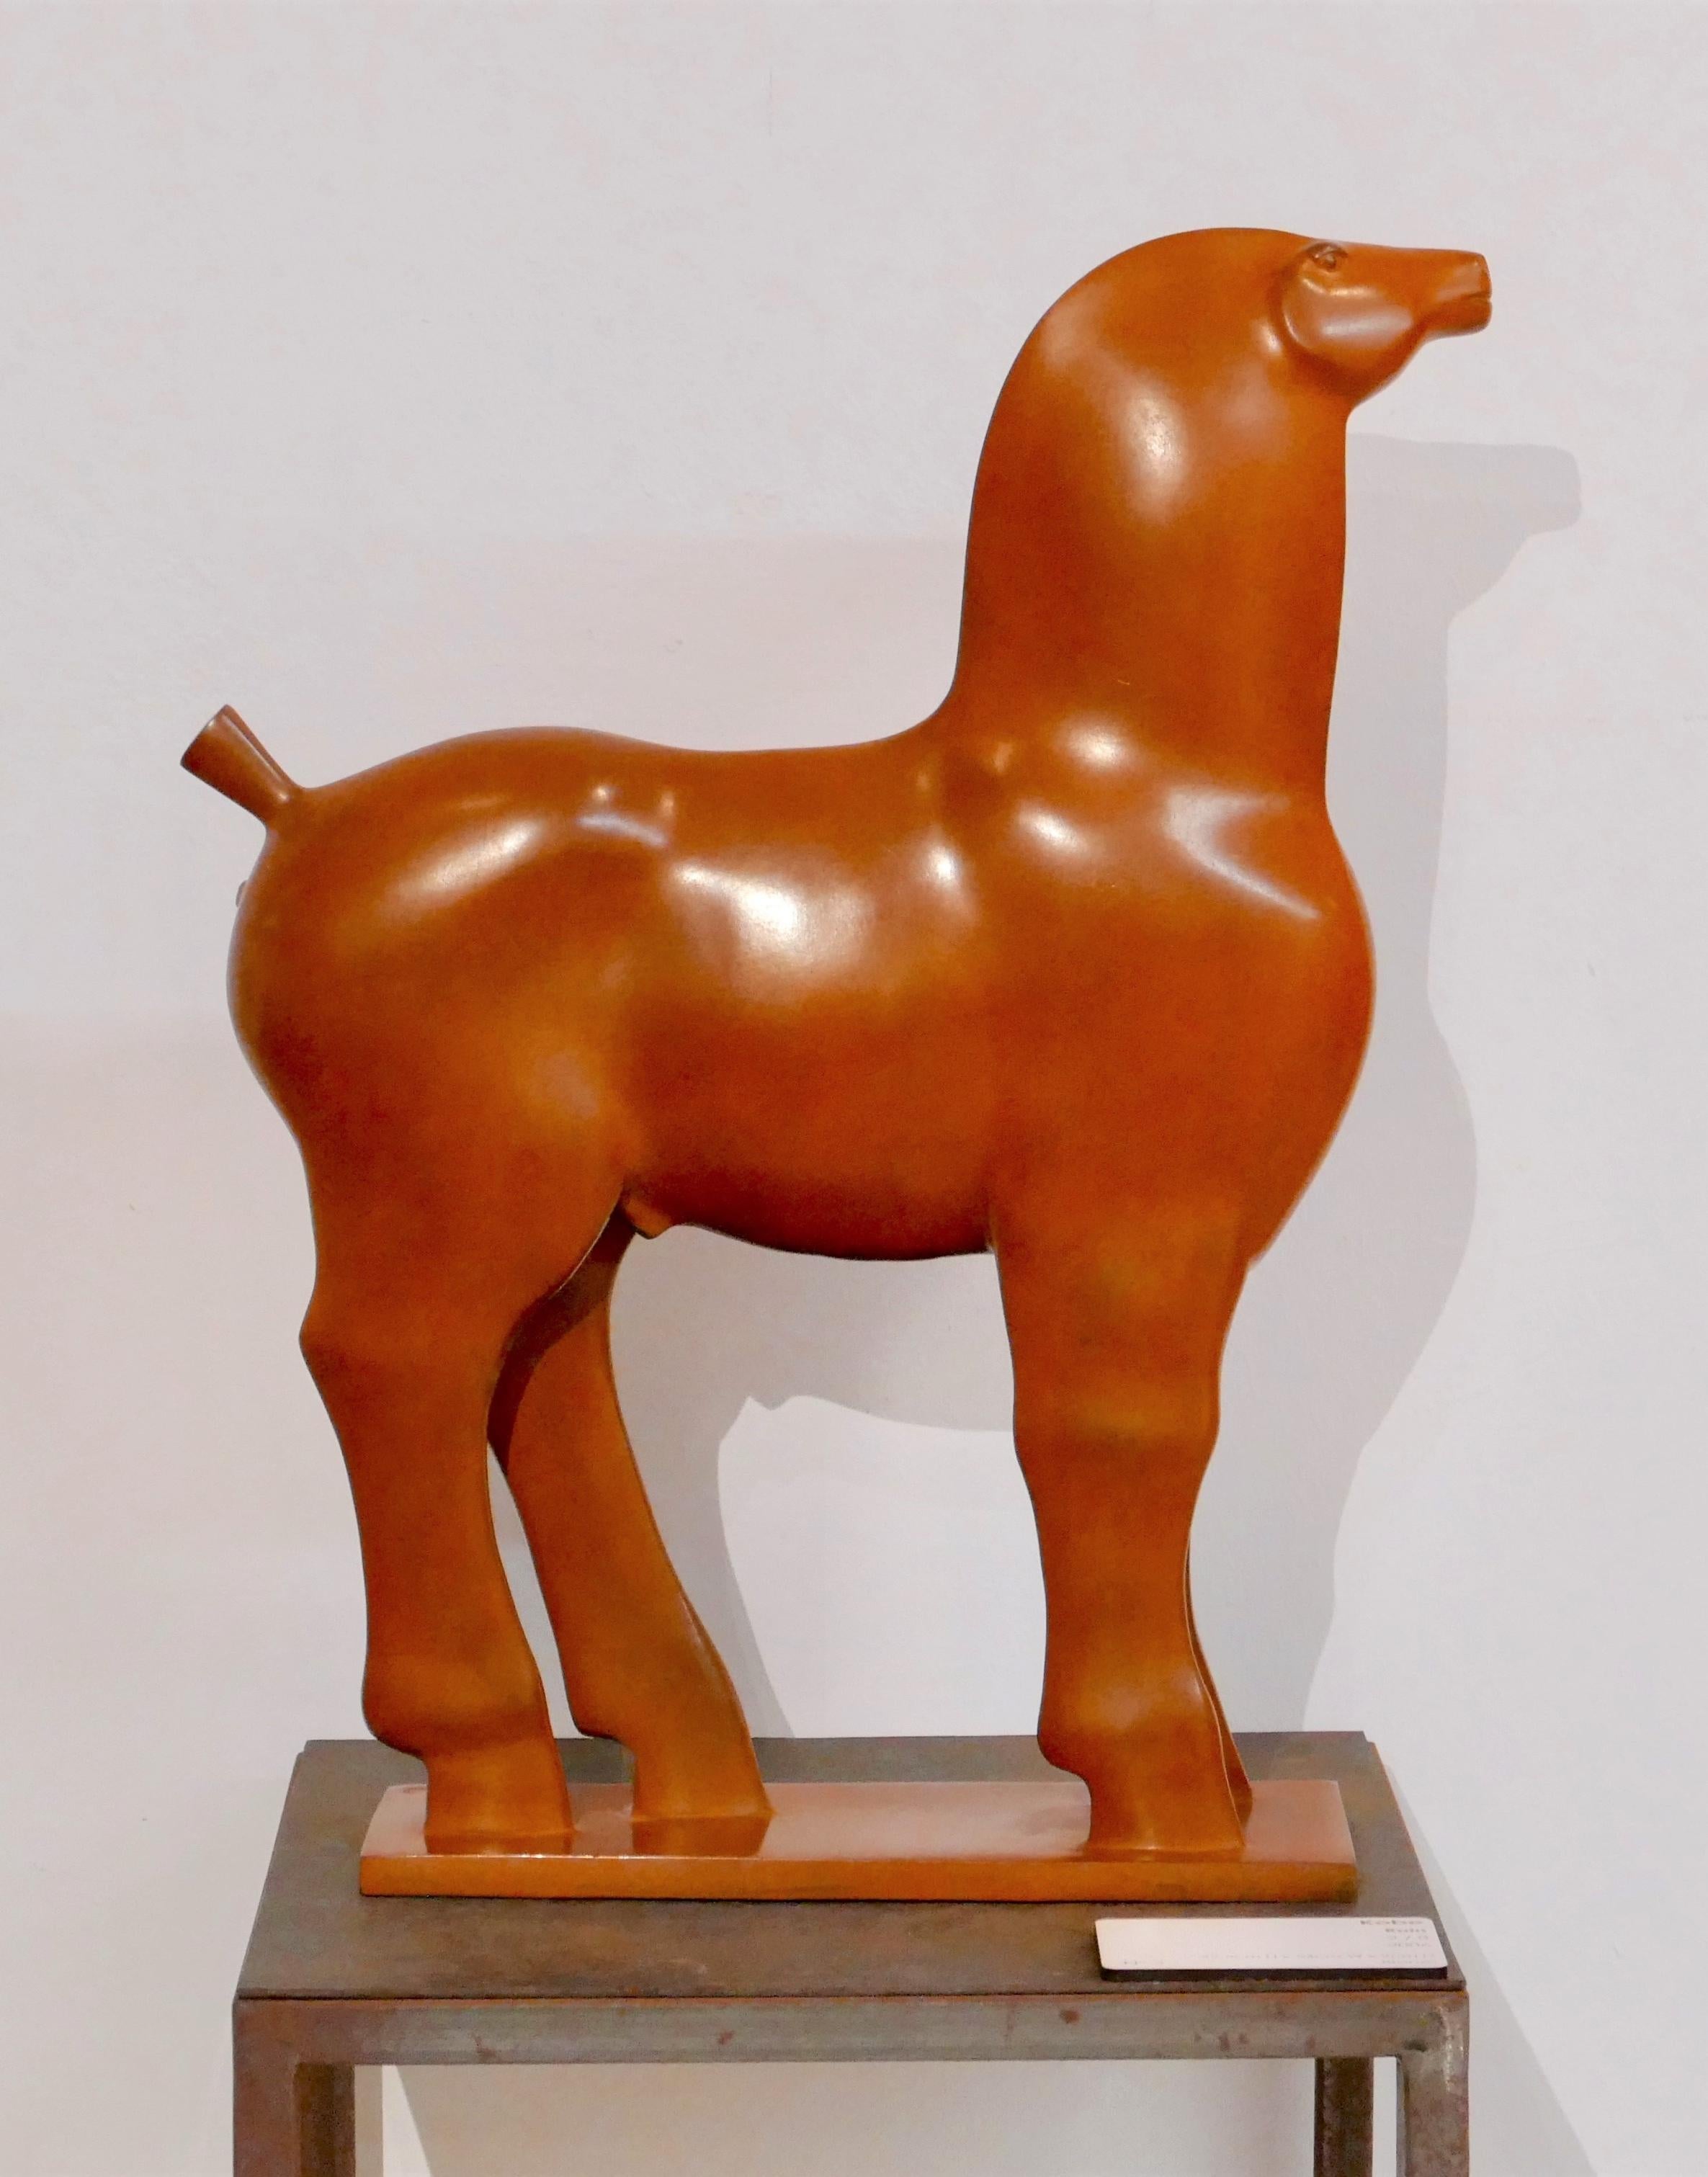 Ruin Cavallo Castrato Horse Bronze Sculpture Animal Contemporary In Stock 
KOBE, pseudonym of Jacques Saelens, was a Belgian artist (Kortrijk, Belgium 1950 – Saint-Julien (Var), France 2014).

He combined the broad with sophistication. Two themes